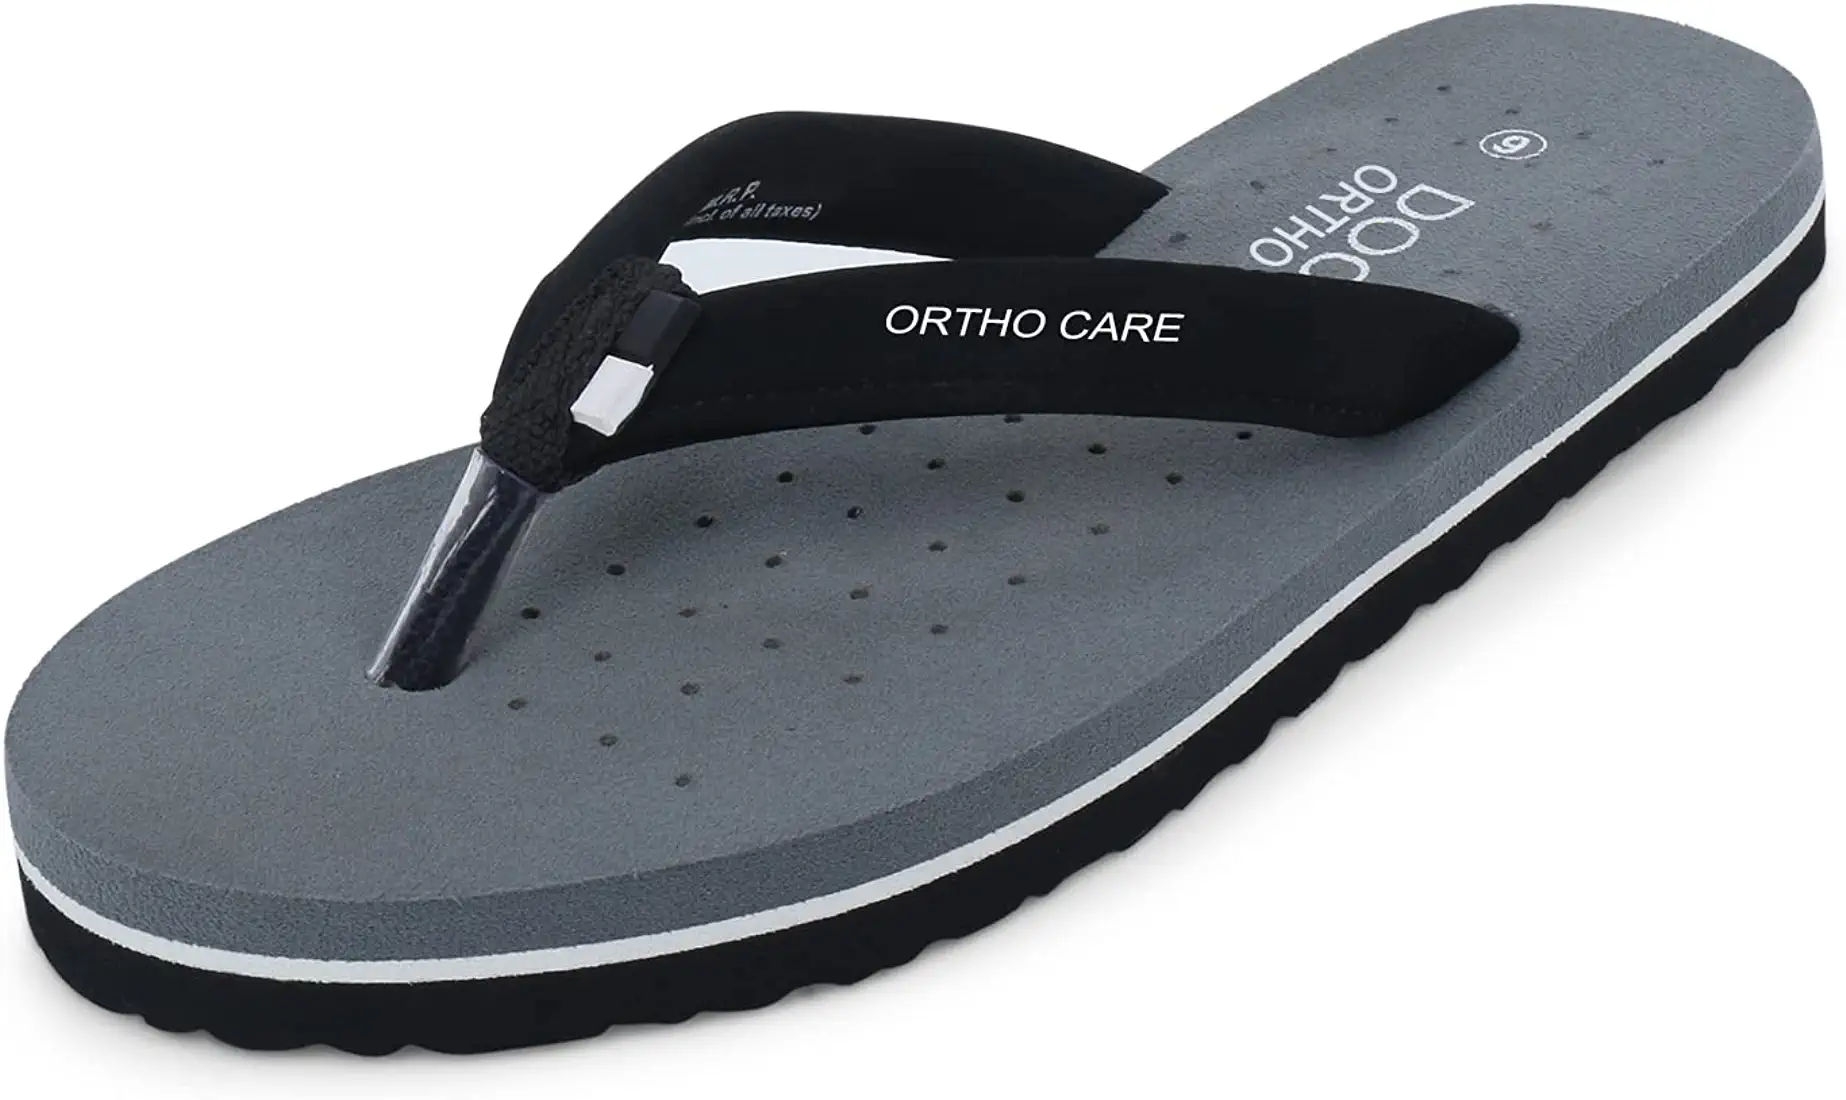 692 House Slipper for Women's Ortho Care |Orthopaedic | Diabetic | Comfortable | Cushion | Black Flip-Flop Ladies and Girls Home Slides for Daily Use 60019